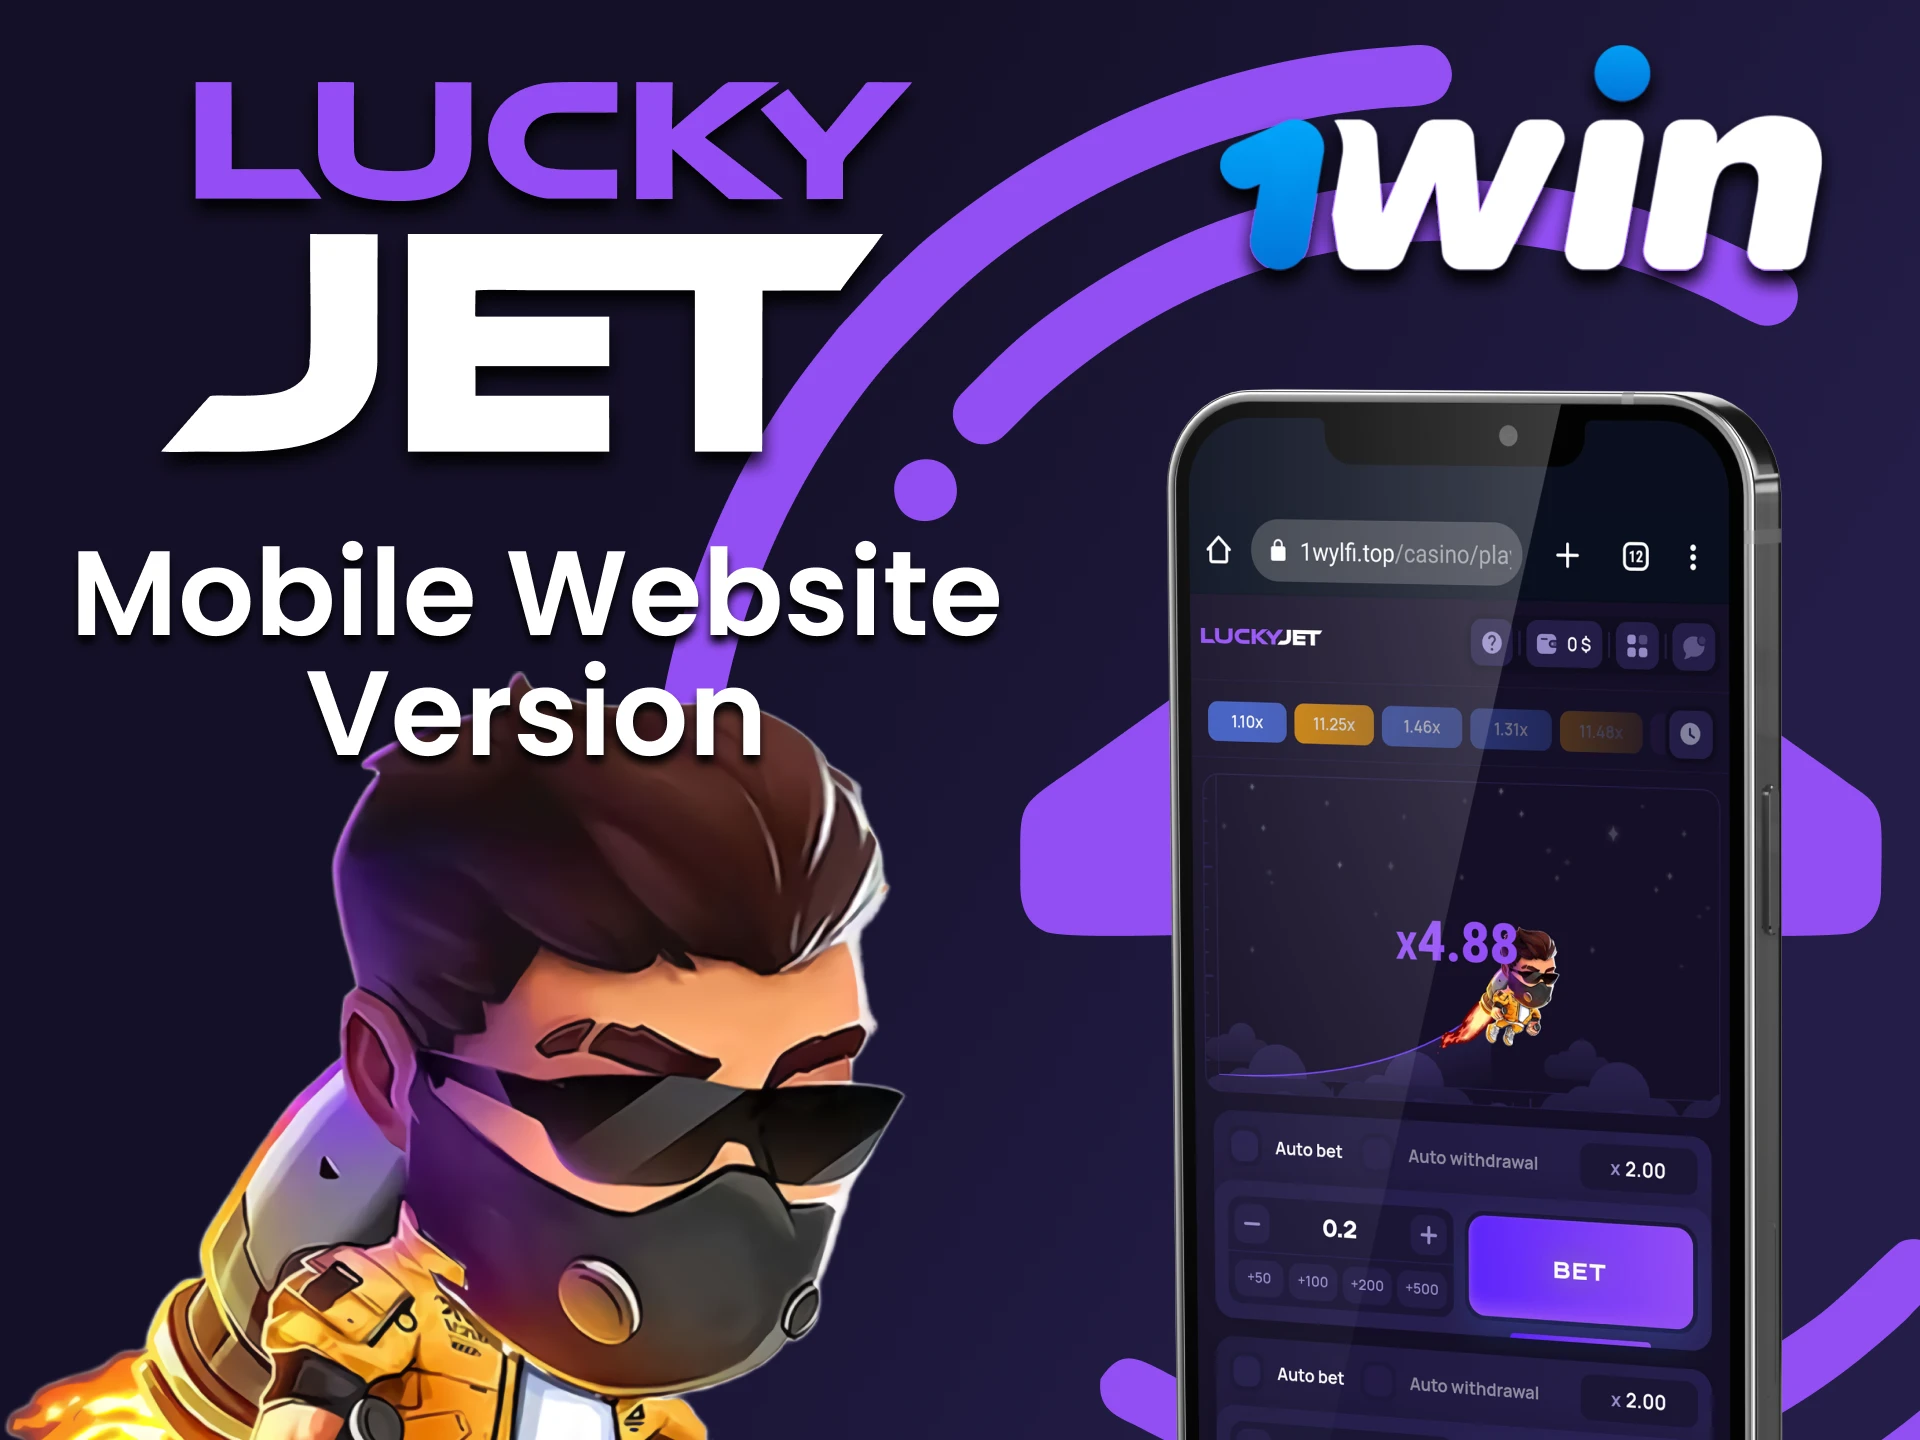 Use the mobile version of the 1win website to play Lucky Jet.